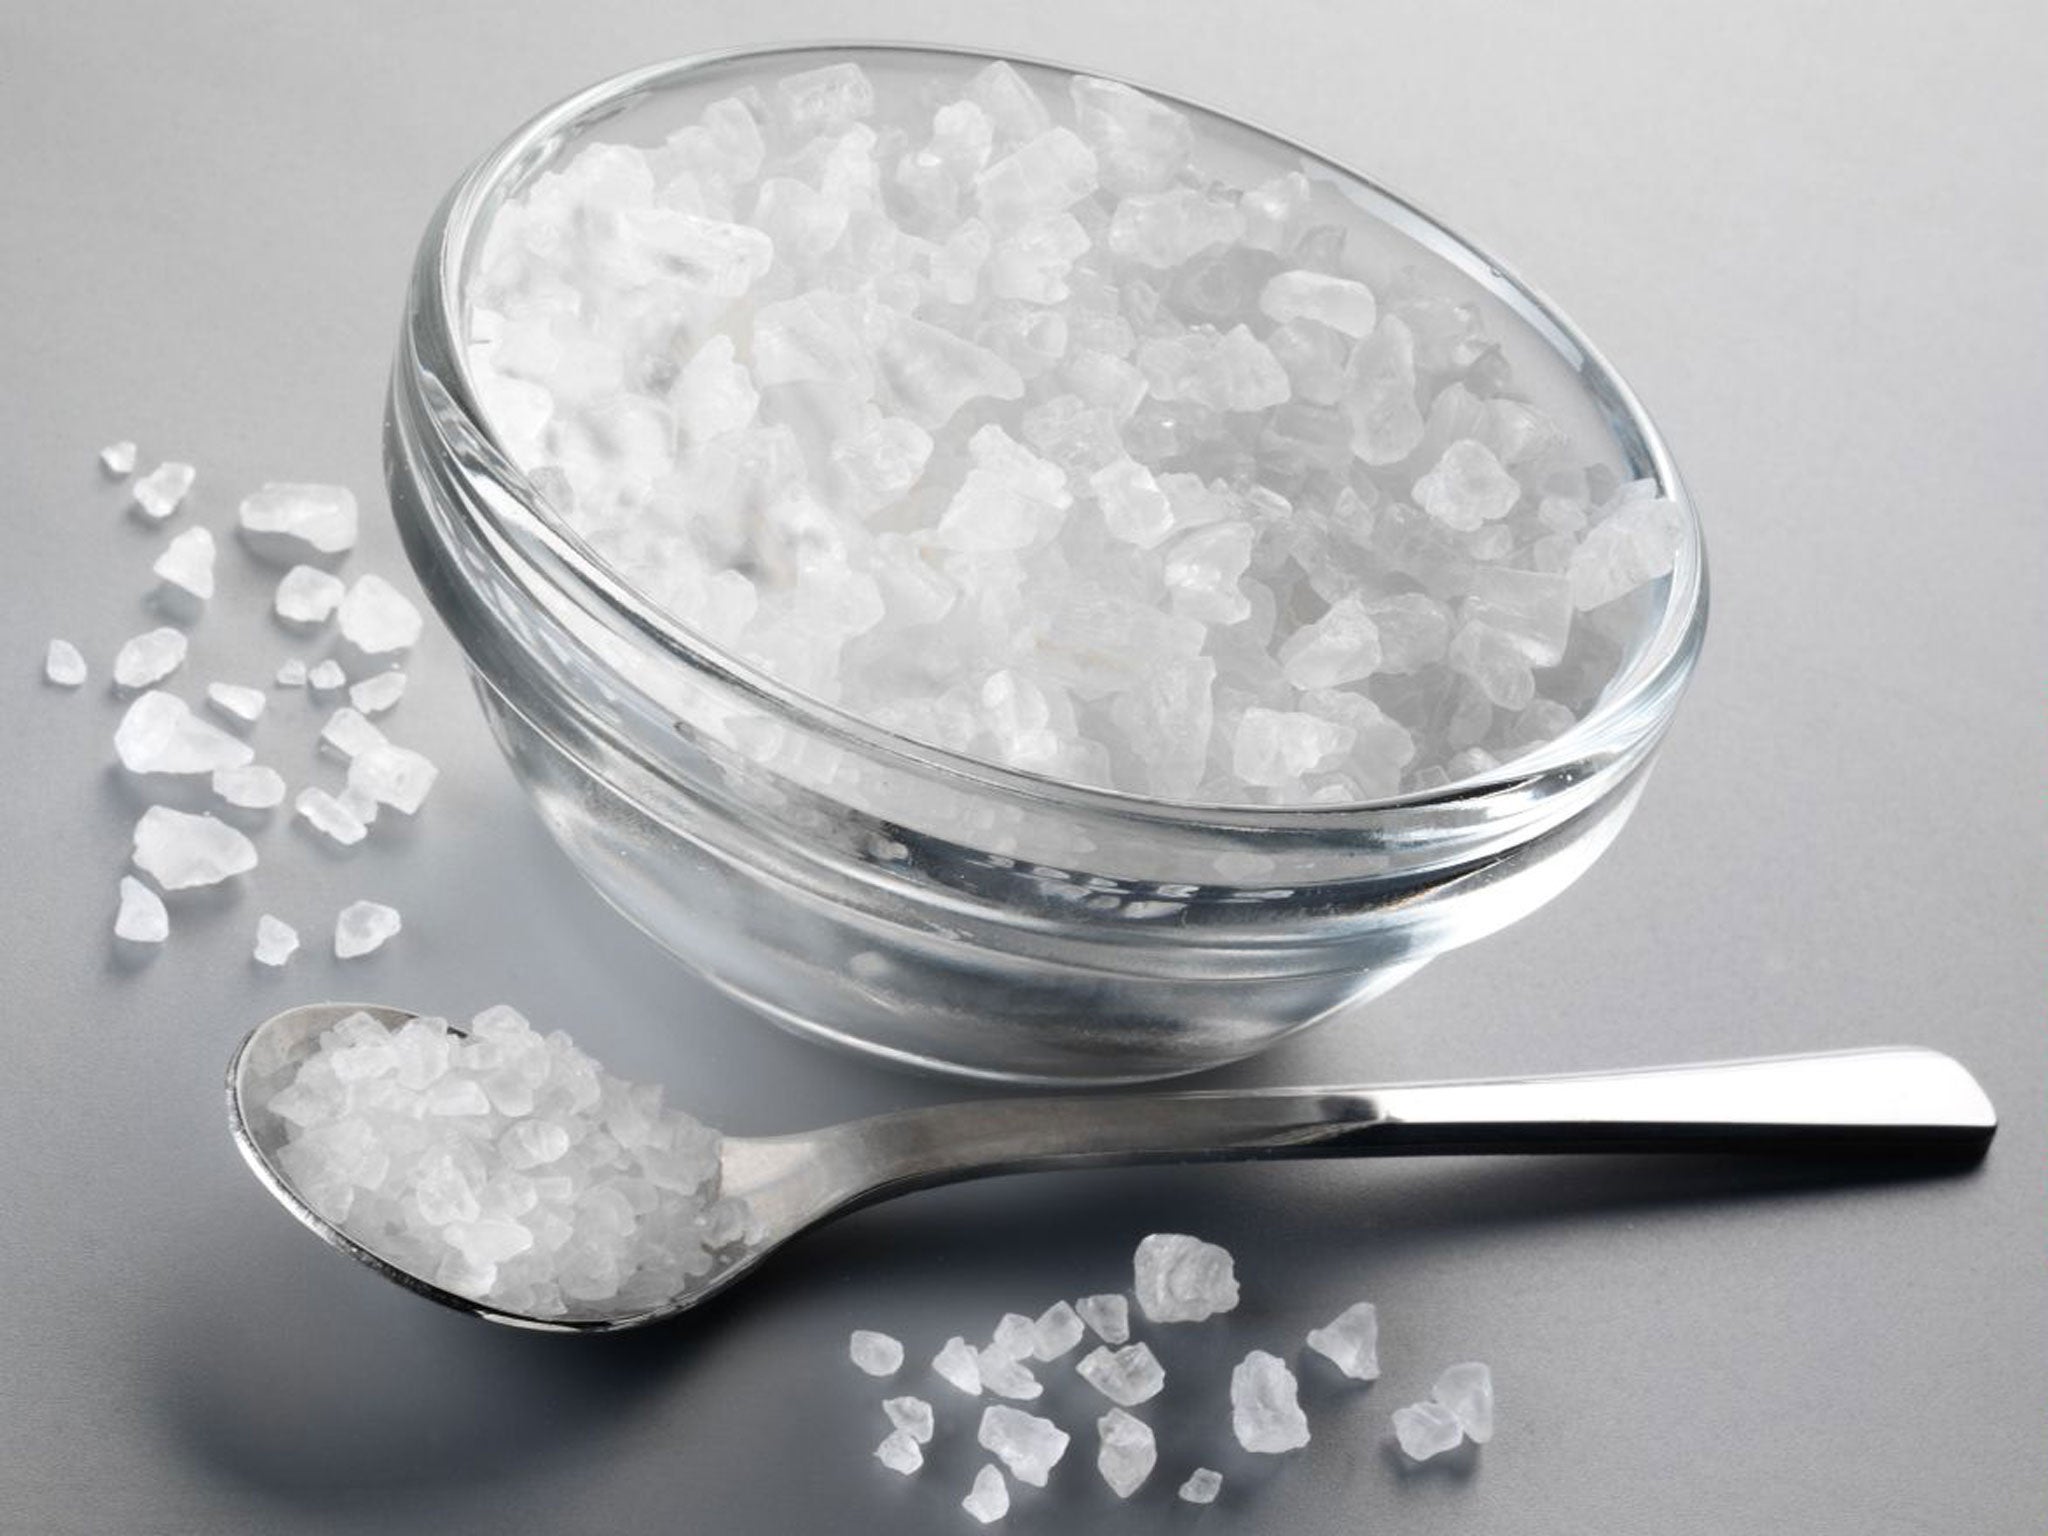 The Food Standards Agency estimates that more than 11 million kilograms of salt have been removed from foods in the UK